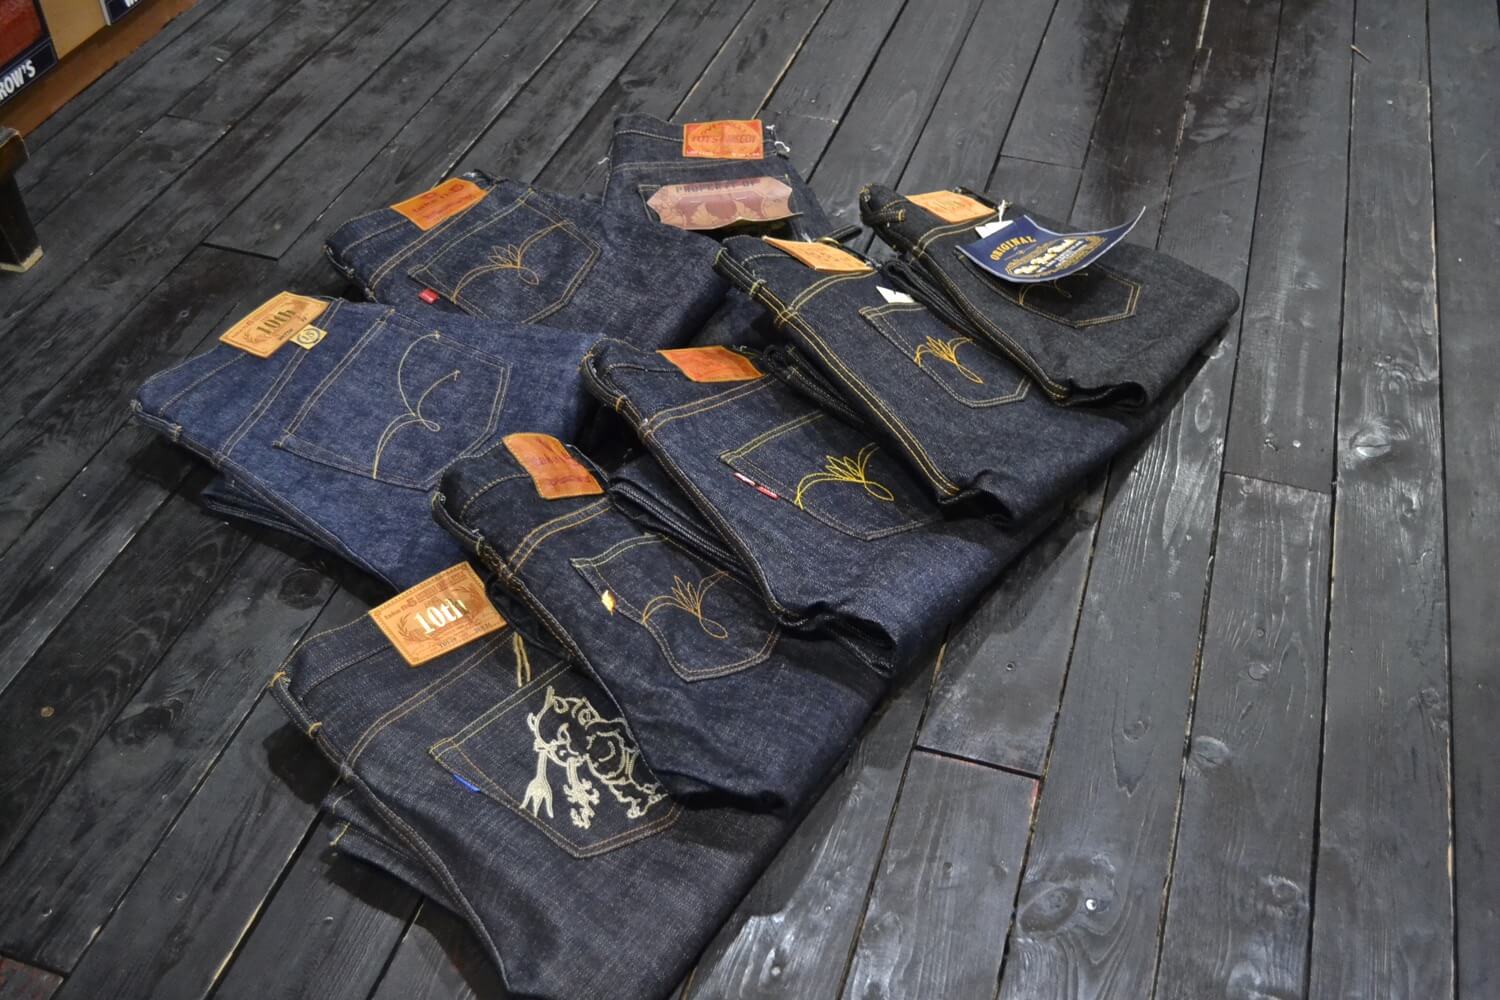 Designs Your Own Jeans -  Hong Kong